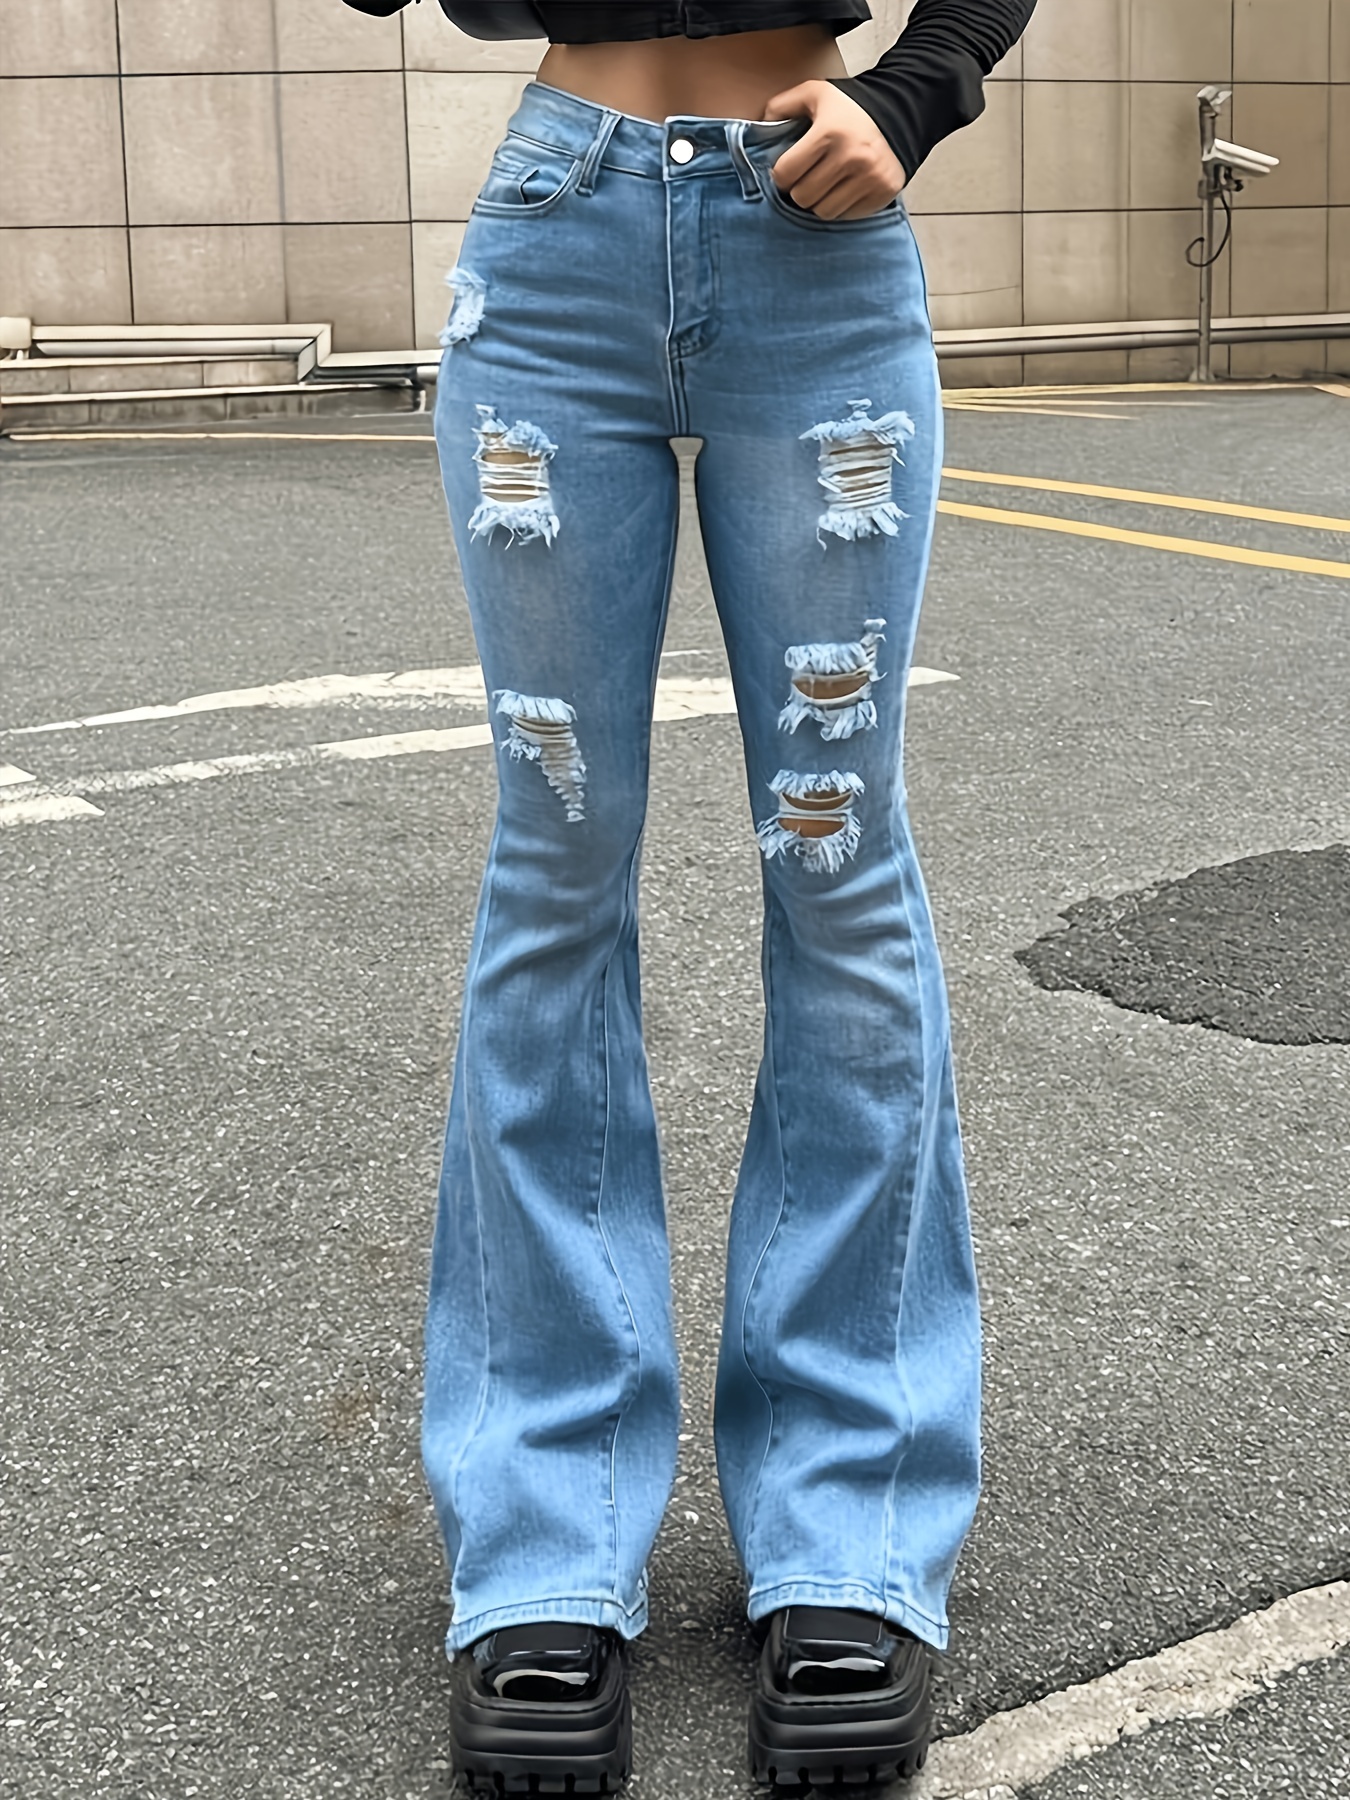 Wholesale ZHEZHE New arrivals bell bottom jeans pants with bandage high  waist flared denim jeans pants women's trousers street wear From  m.